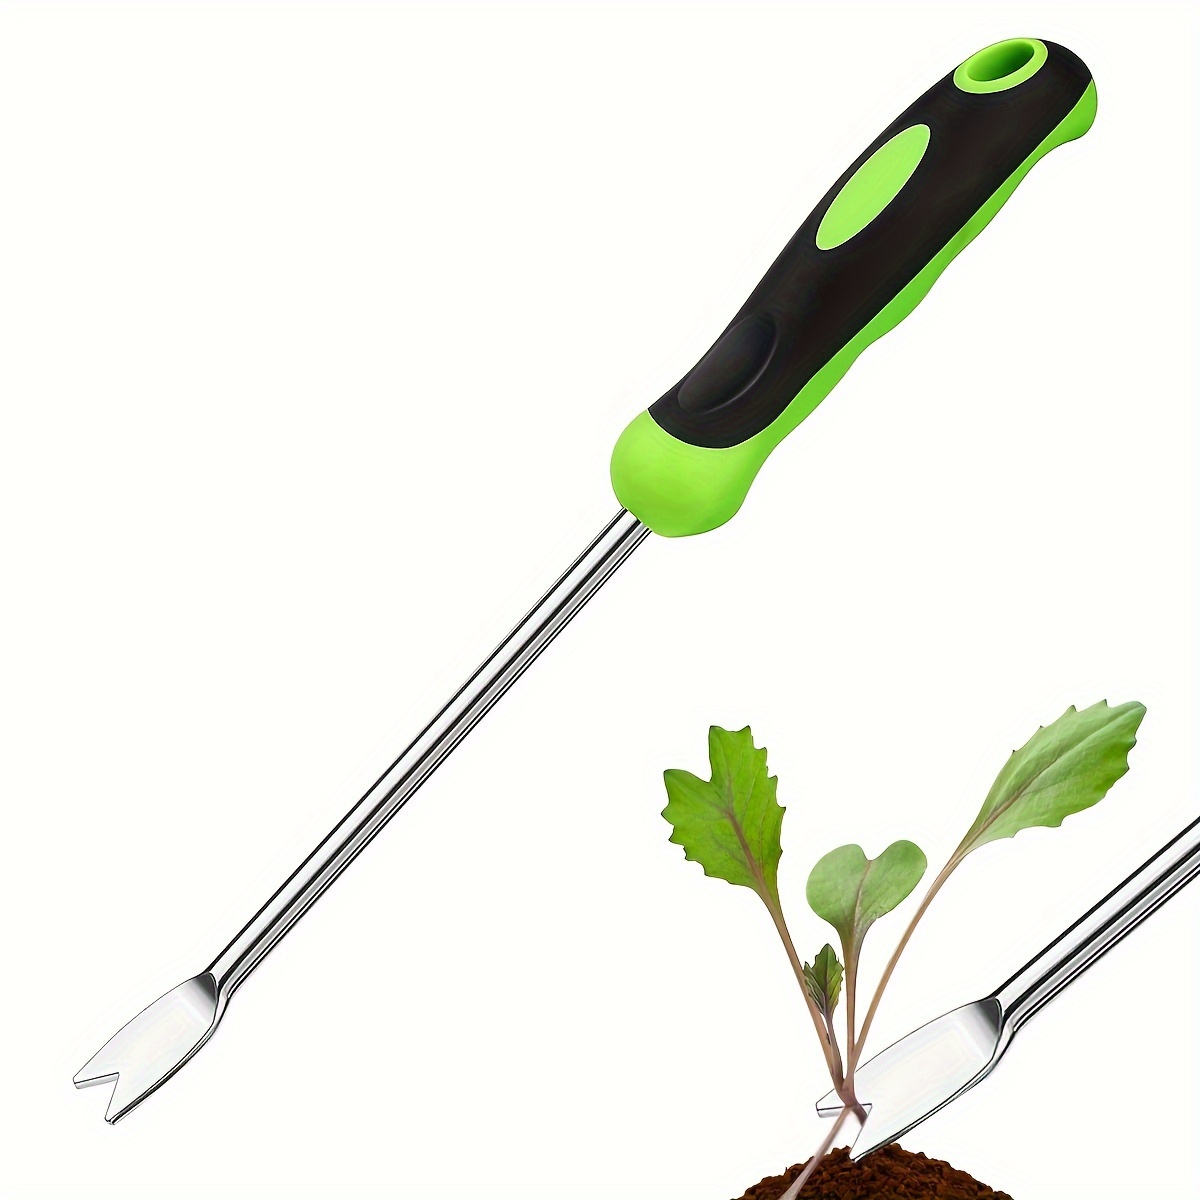 

1pc Stainless Steel Weeding Trowel, 12 Inch Garden Hand Weeder With 6.7 Inch Handle & Ergonomic Grip, Metal Dandelion Weeding Tool For Garden Lawn Yard, Sturdy Puller For Soil Digging And Removal